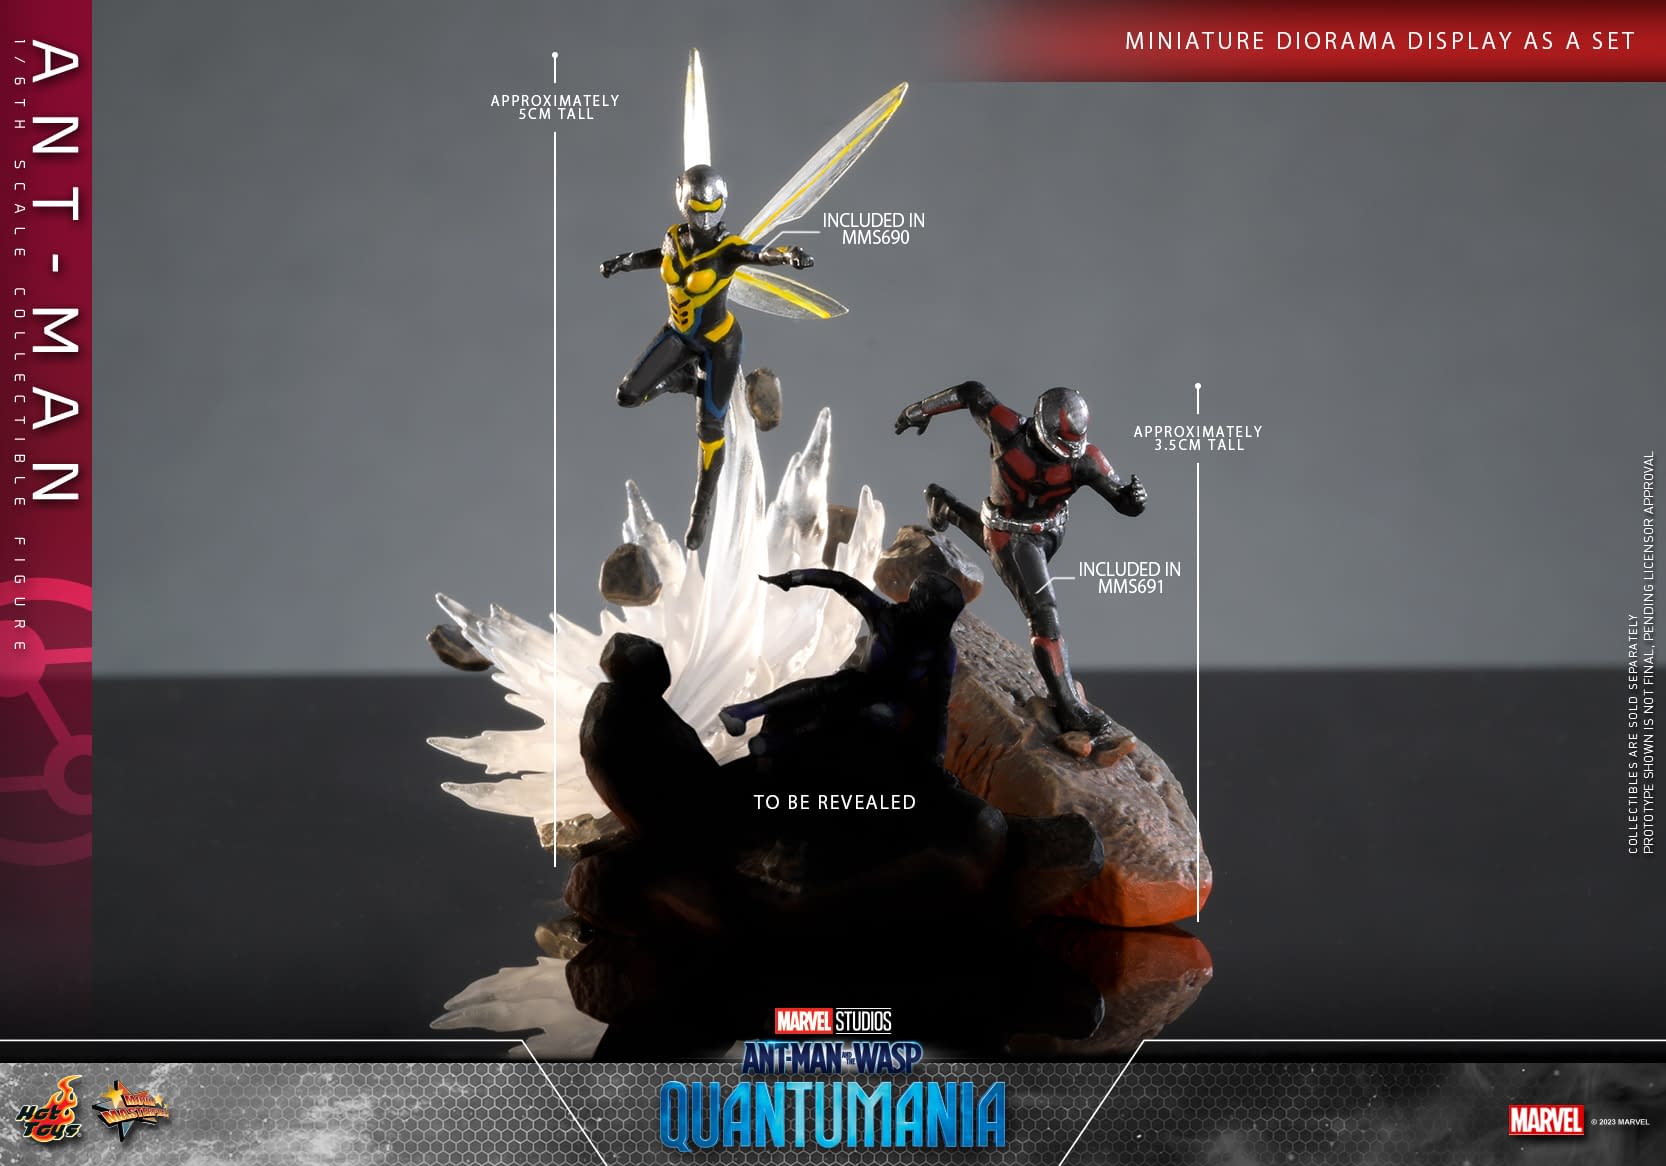 Hot Toys Enters the Quantum Realm with New MCU Ant-Man 1/6 Figure 